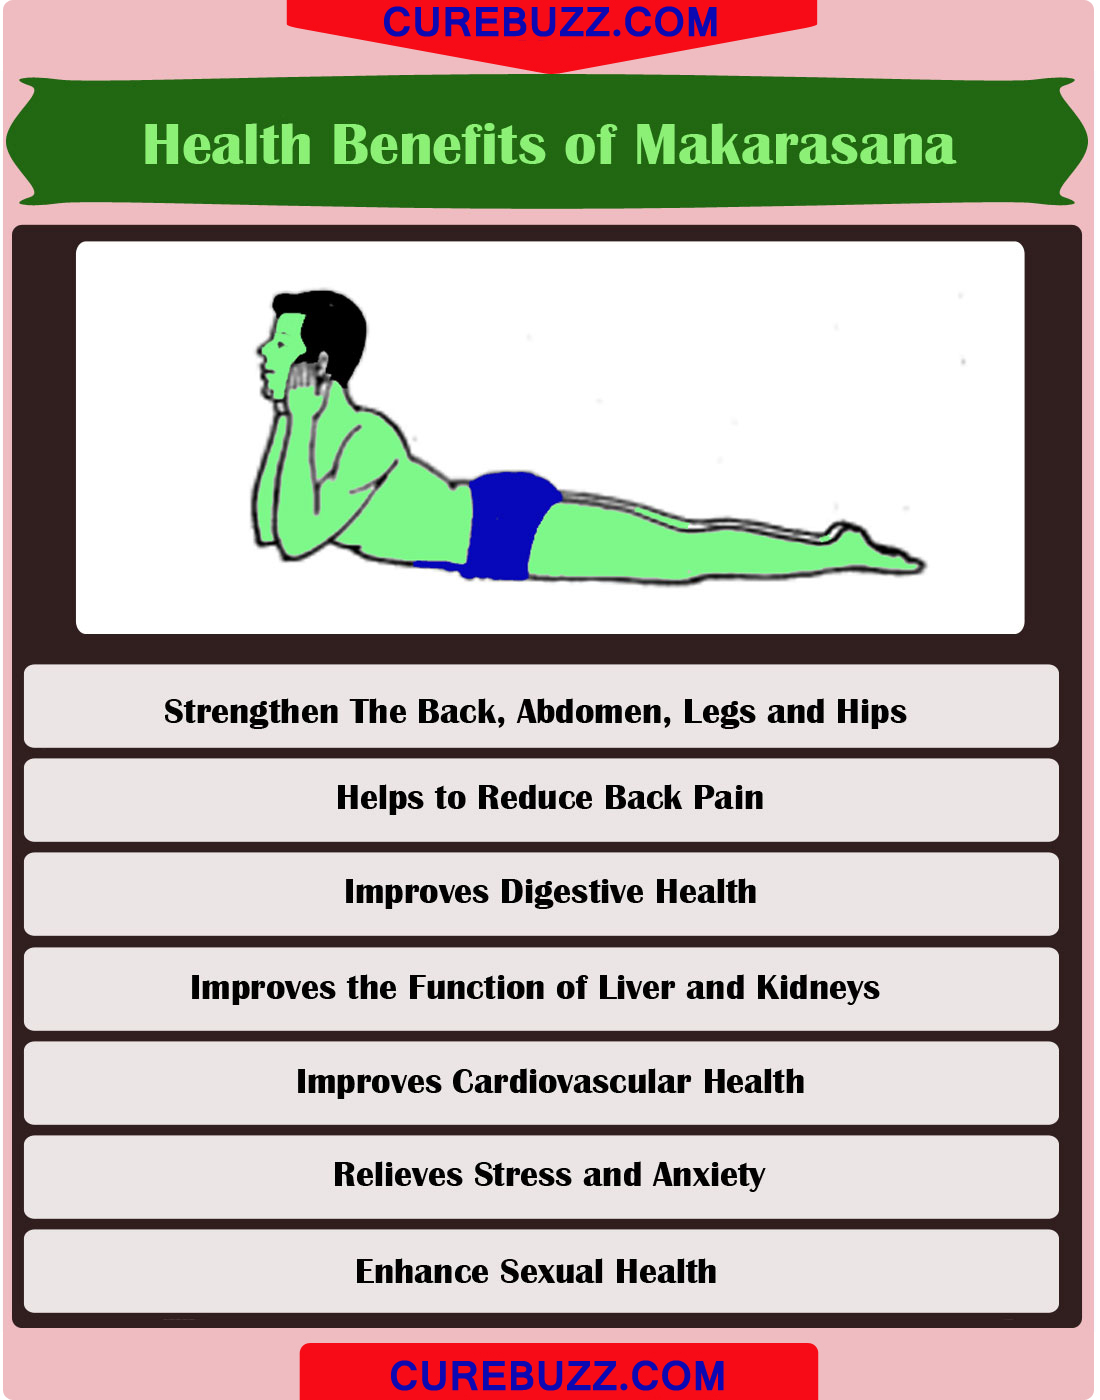 healthy workouts for men